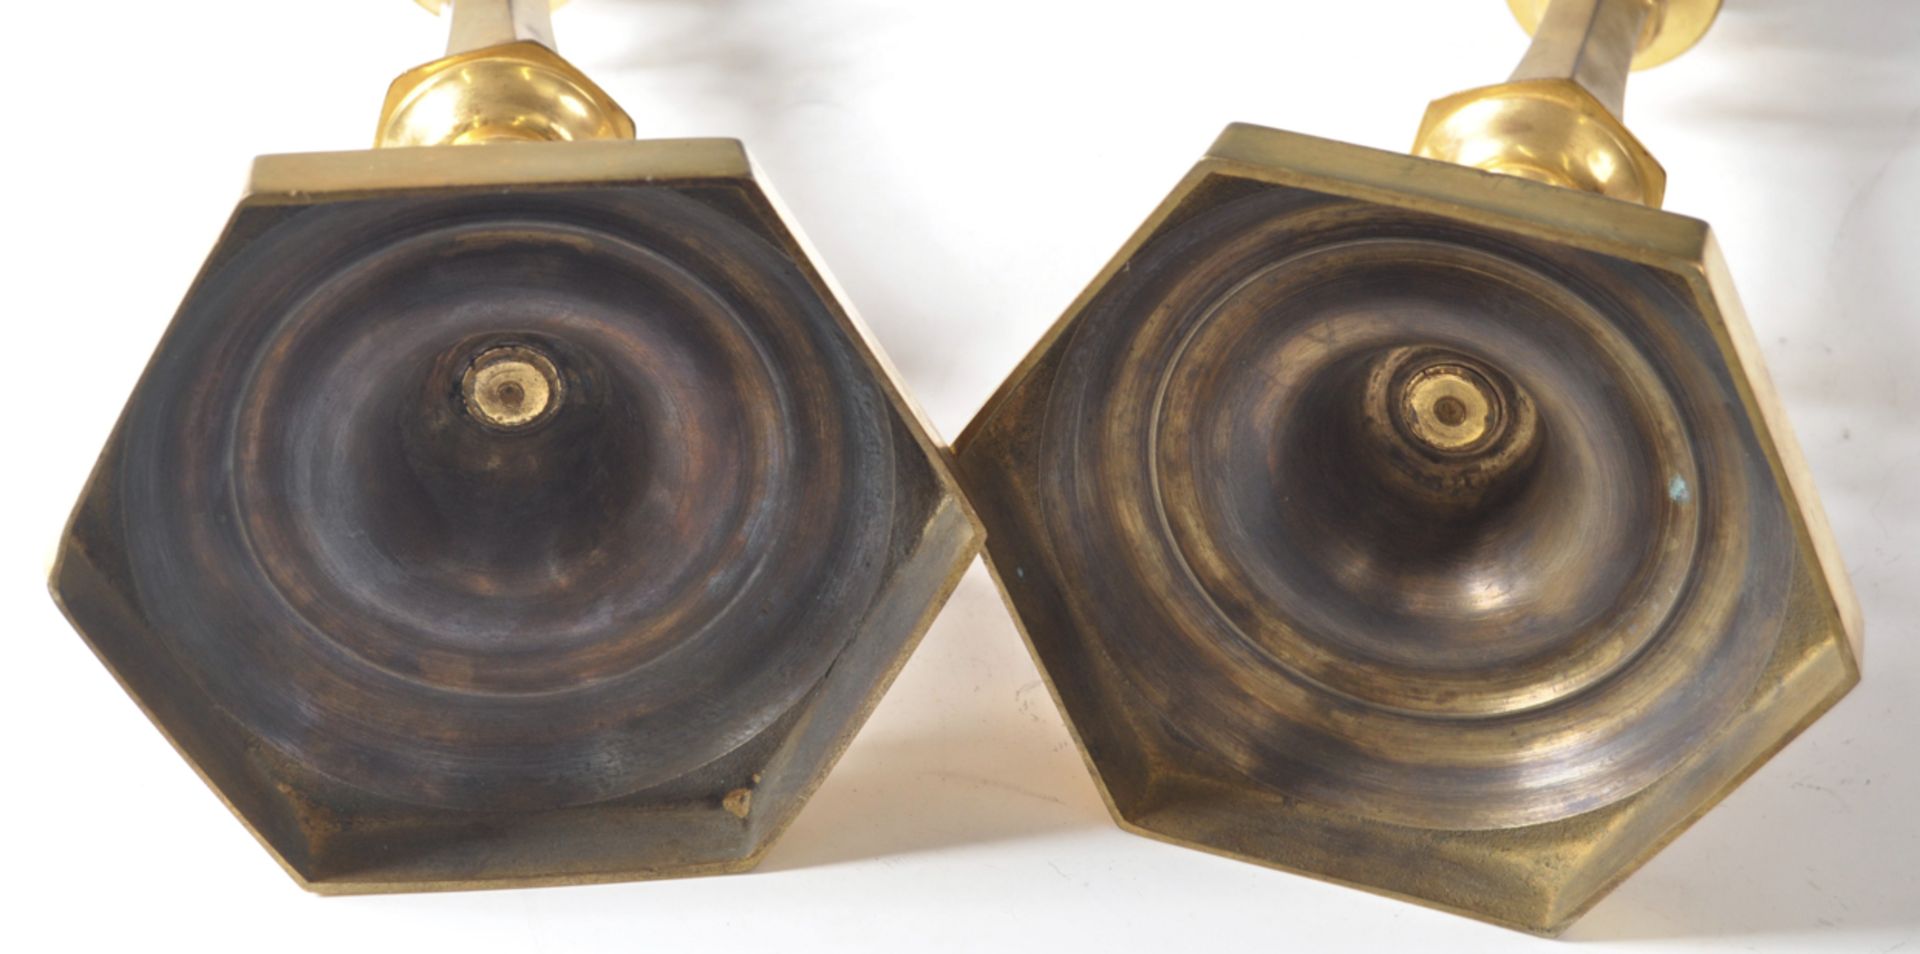 C19th pair of gilded brass candlesticks - Image 4 of 5